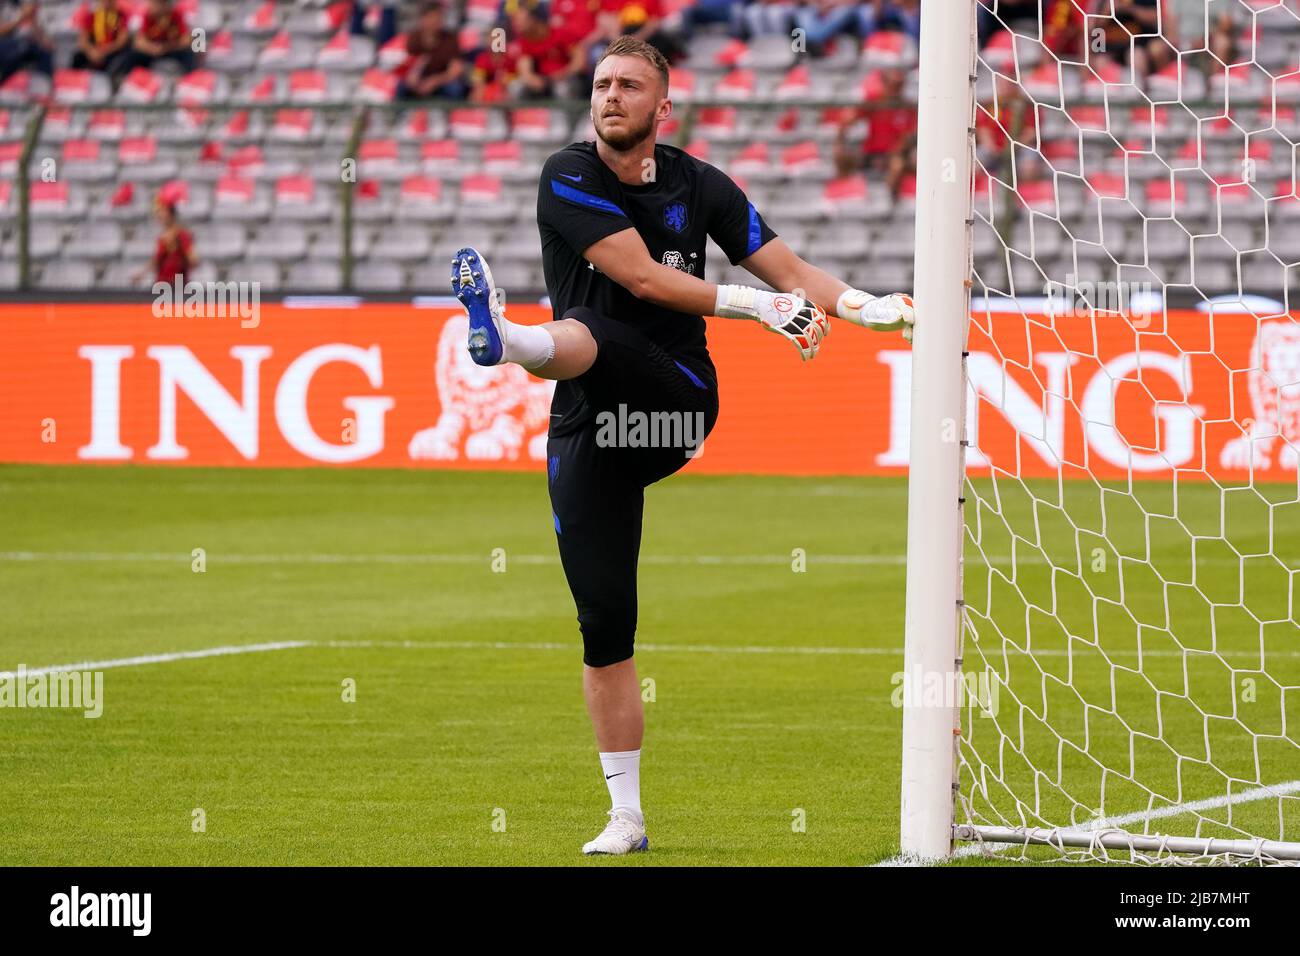 Brussels, Belgium. 03rd June, 2022. BRUSSELS, BELGIUM - JUNE 3: Jasper Cillessen of the Netherlands warms up before kick-off during the UEFA Nations League League A Group 4 match between Belgium and Netherlands at the King Baudouin Stadium on June 3, 2022 in Brussels, Belgium (Photo by Jeroen Meuwsen/Orange Pictures) Credit: Orange Pics BV/Alamy Live News Stock Photo